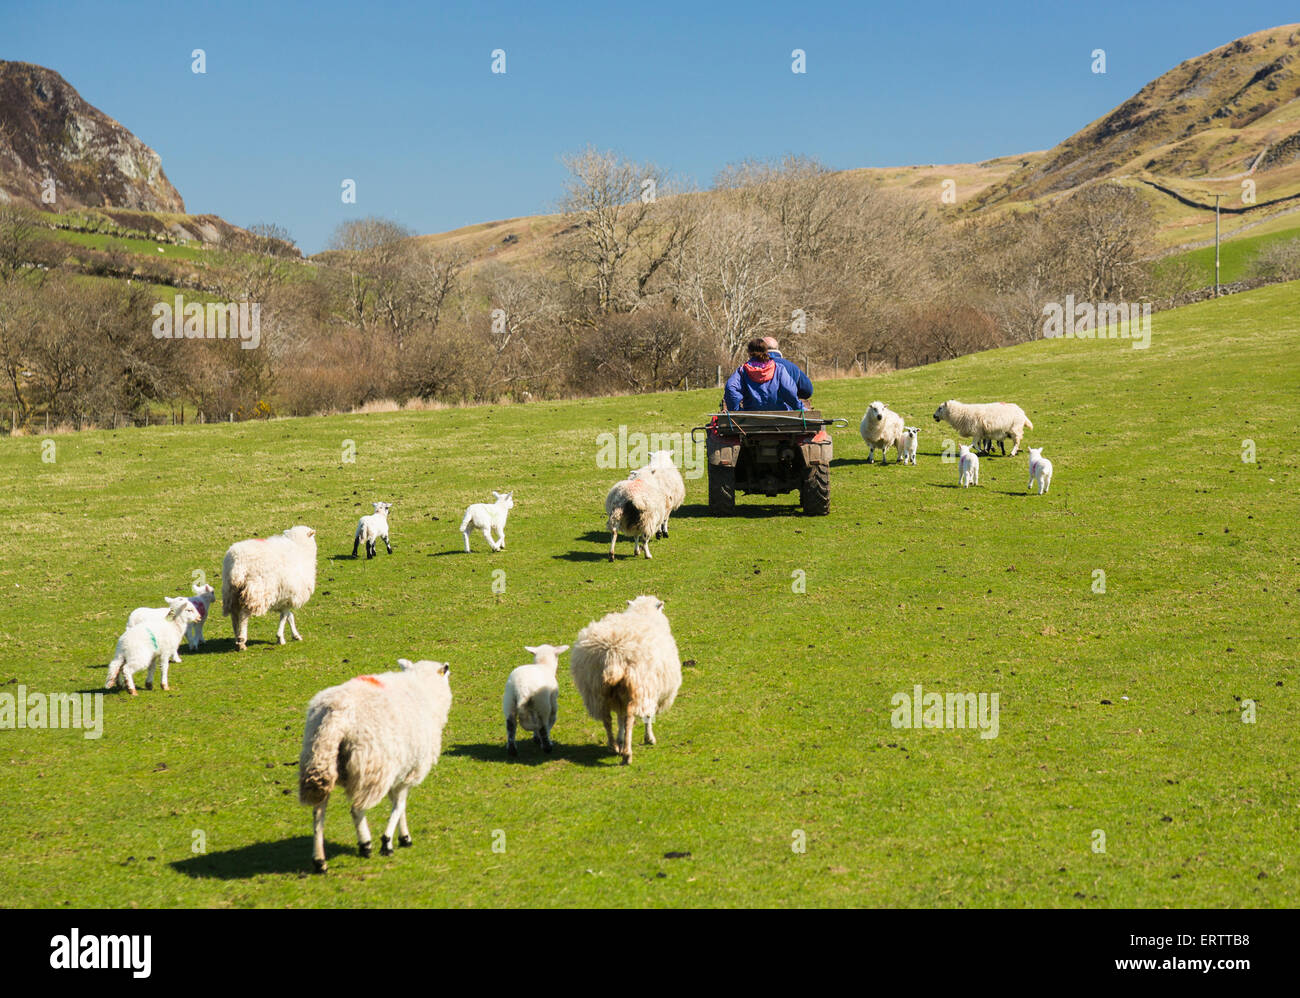 Sheep and lambs follow farmer on a quad bike in a field, Welsh hill farm, Snowdonia, Wales, UK farming in the spring season Stock Photo